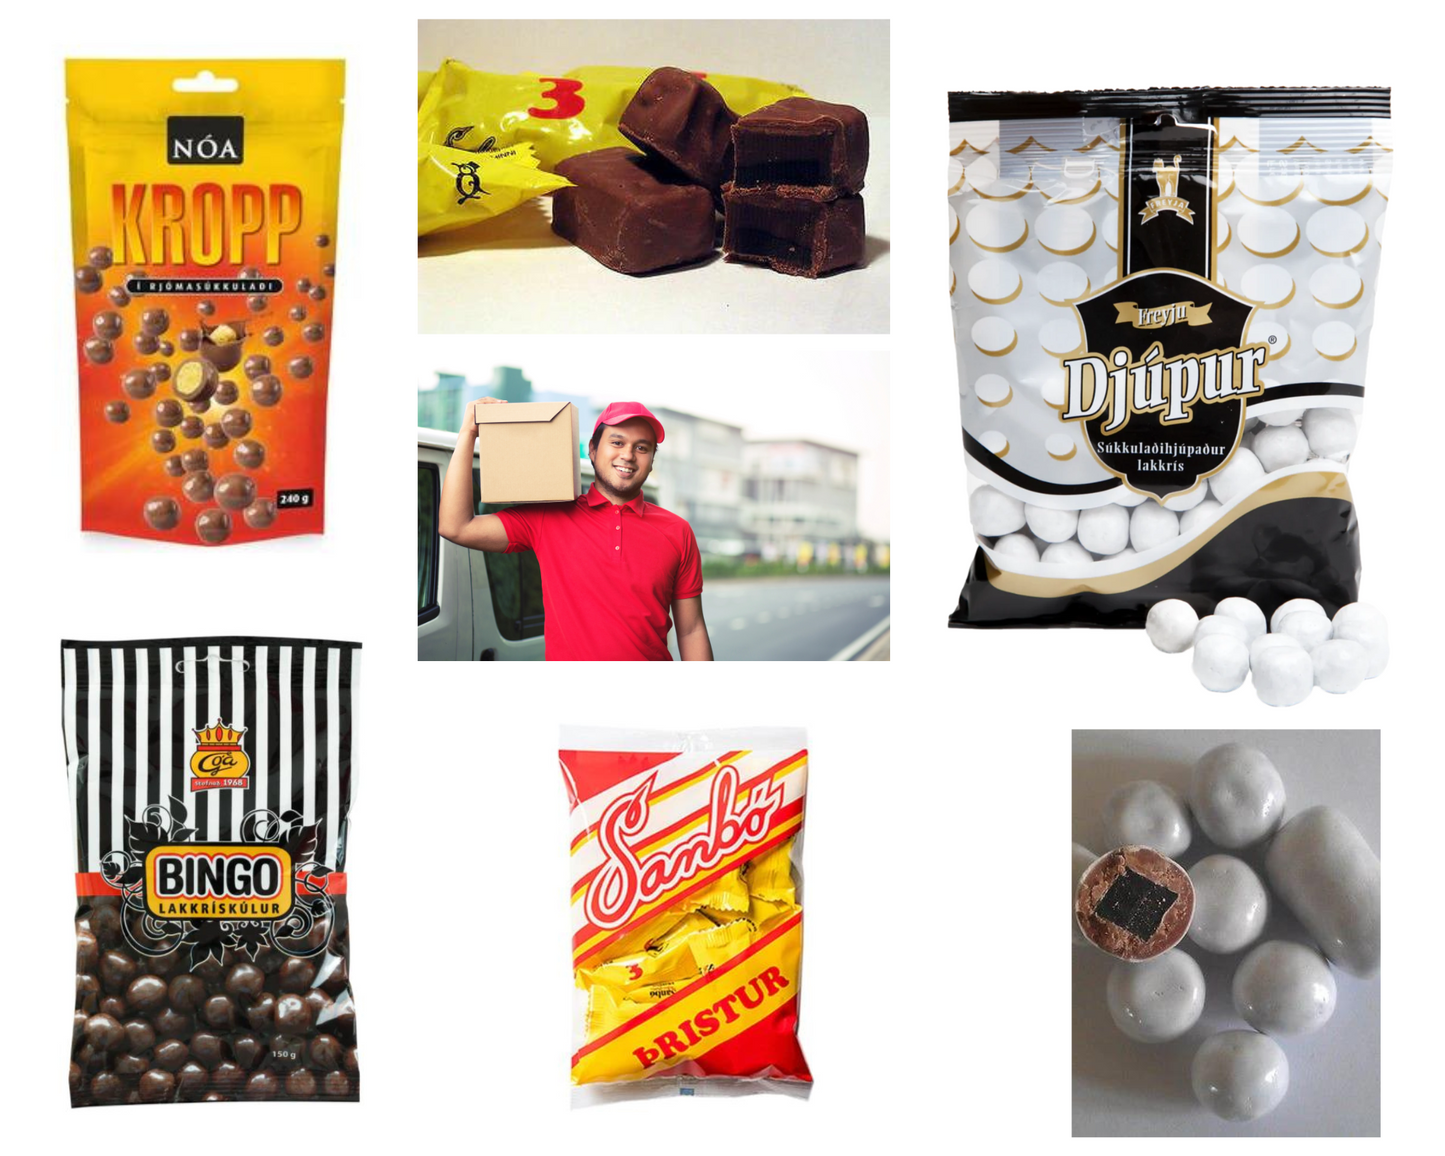 A mix of our most popular Icelandic candy in one bundle. You'll get a variety of flavors and textures in one package, perfect for gifting or snacking. These individually wrapped treats are both delicious and convenient, allowing you to enjoy a variety of flavors without committing to a large quantity of any one kind. - Topiceland